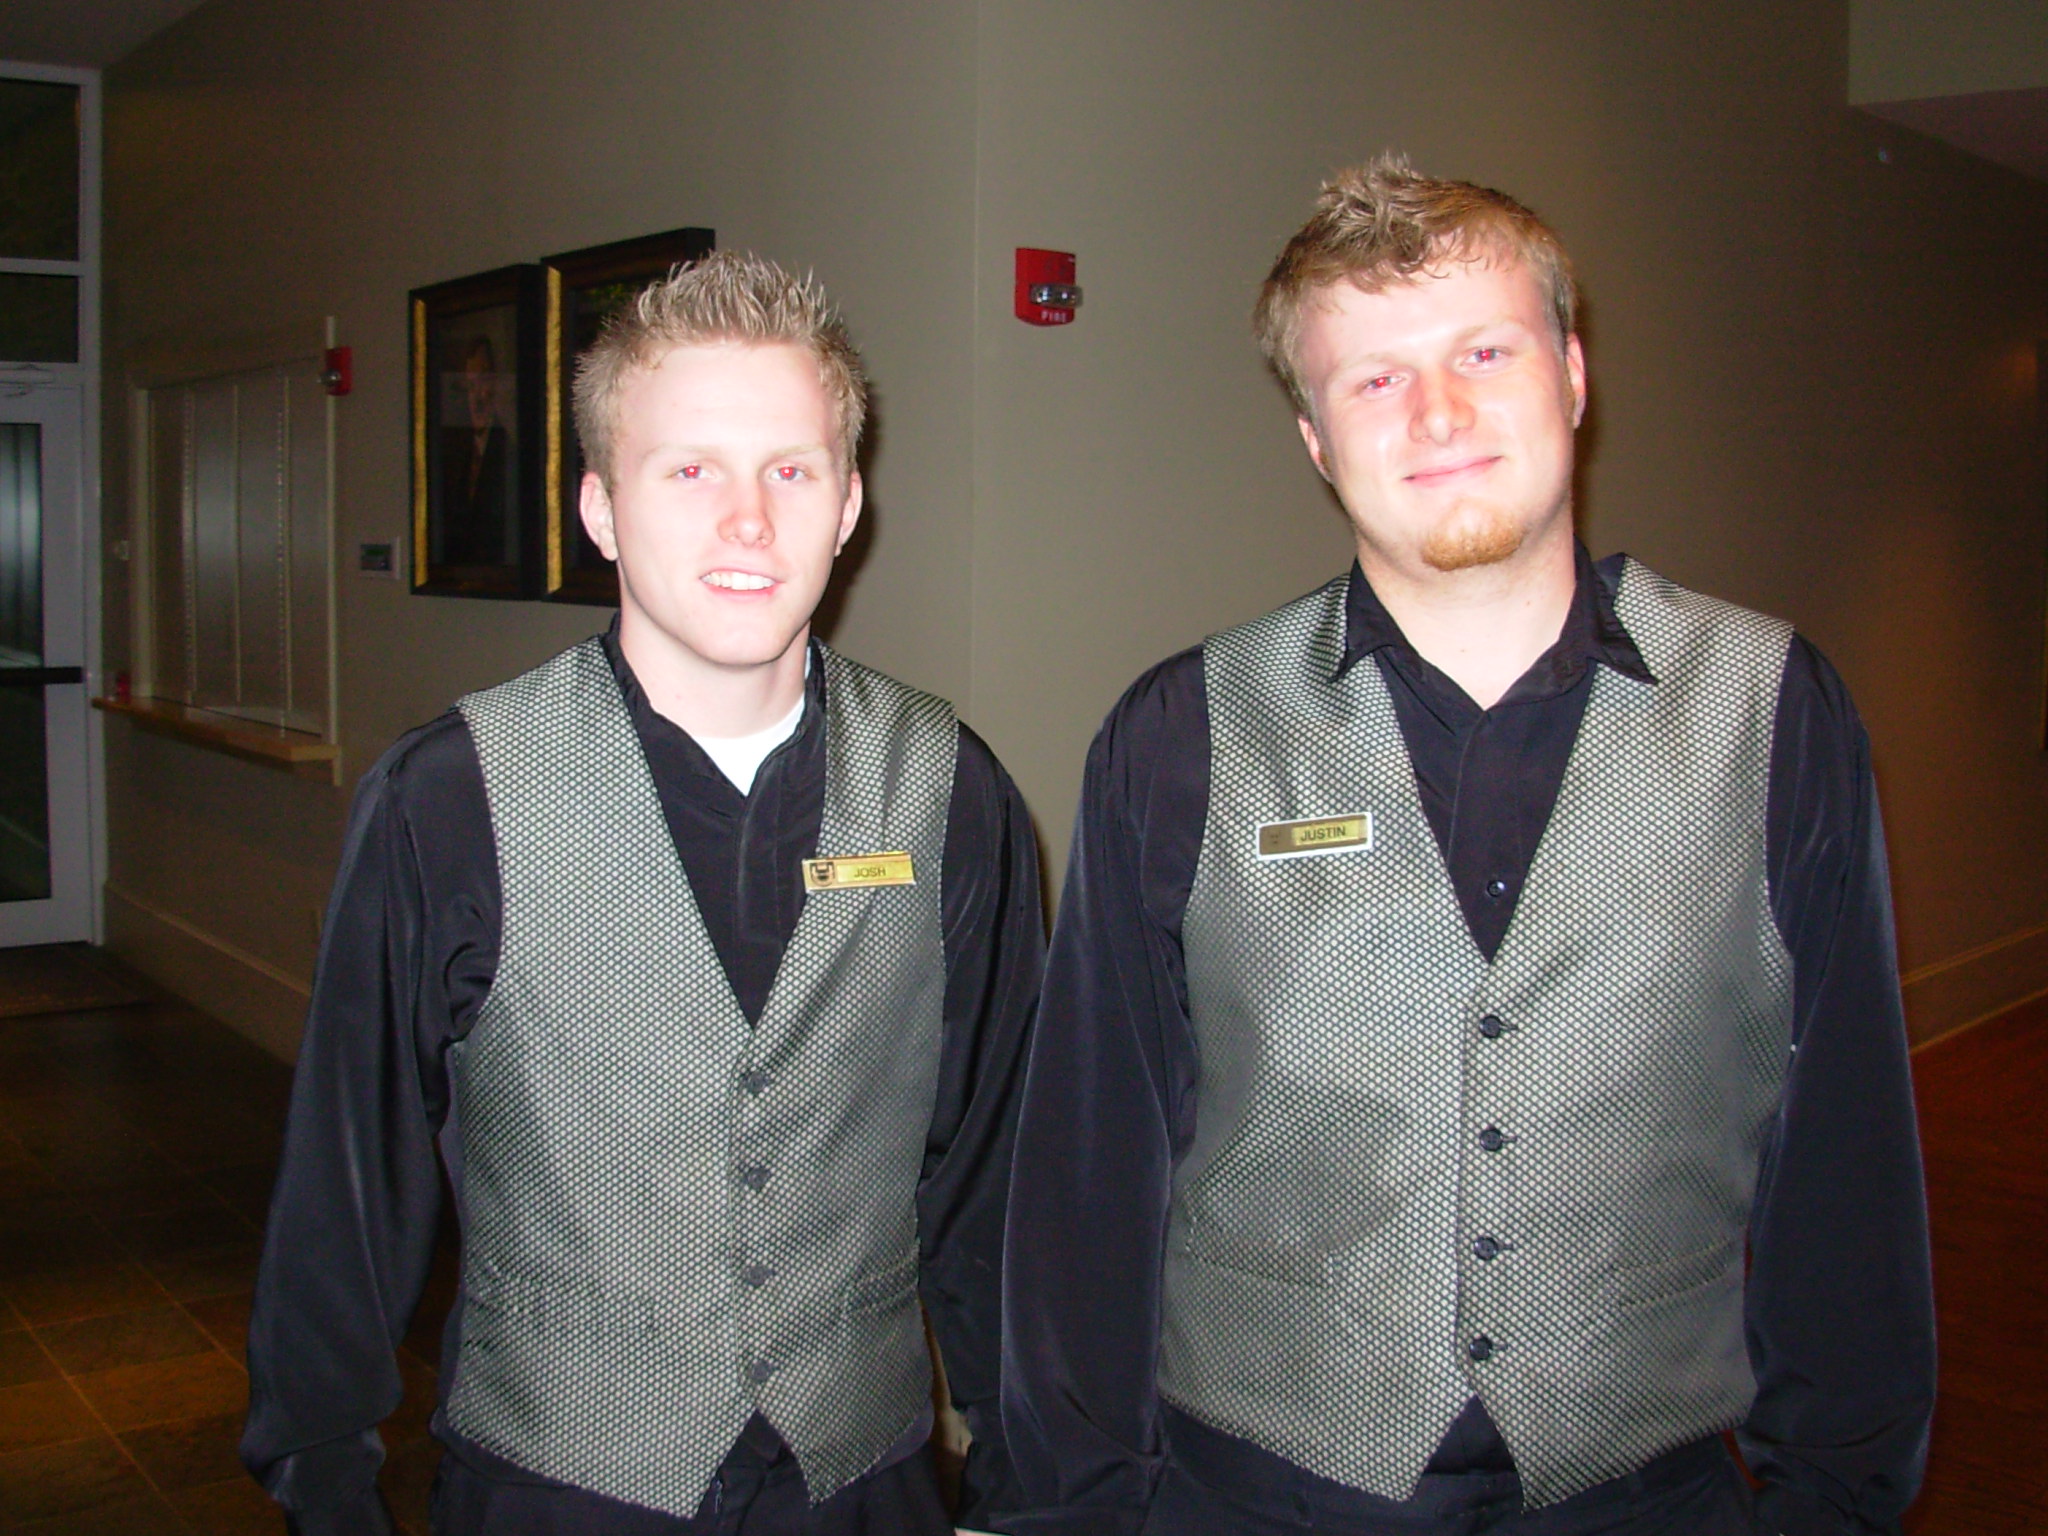 West Shore Country Club servving brothers...
